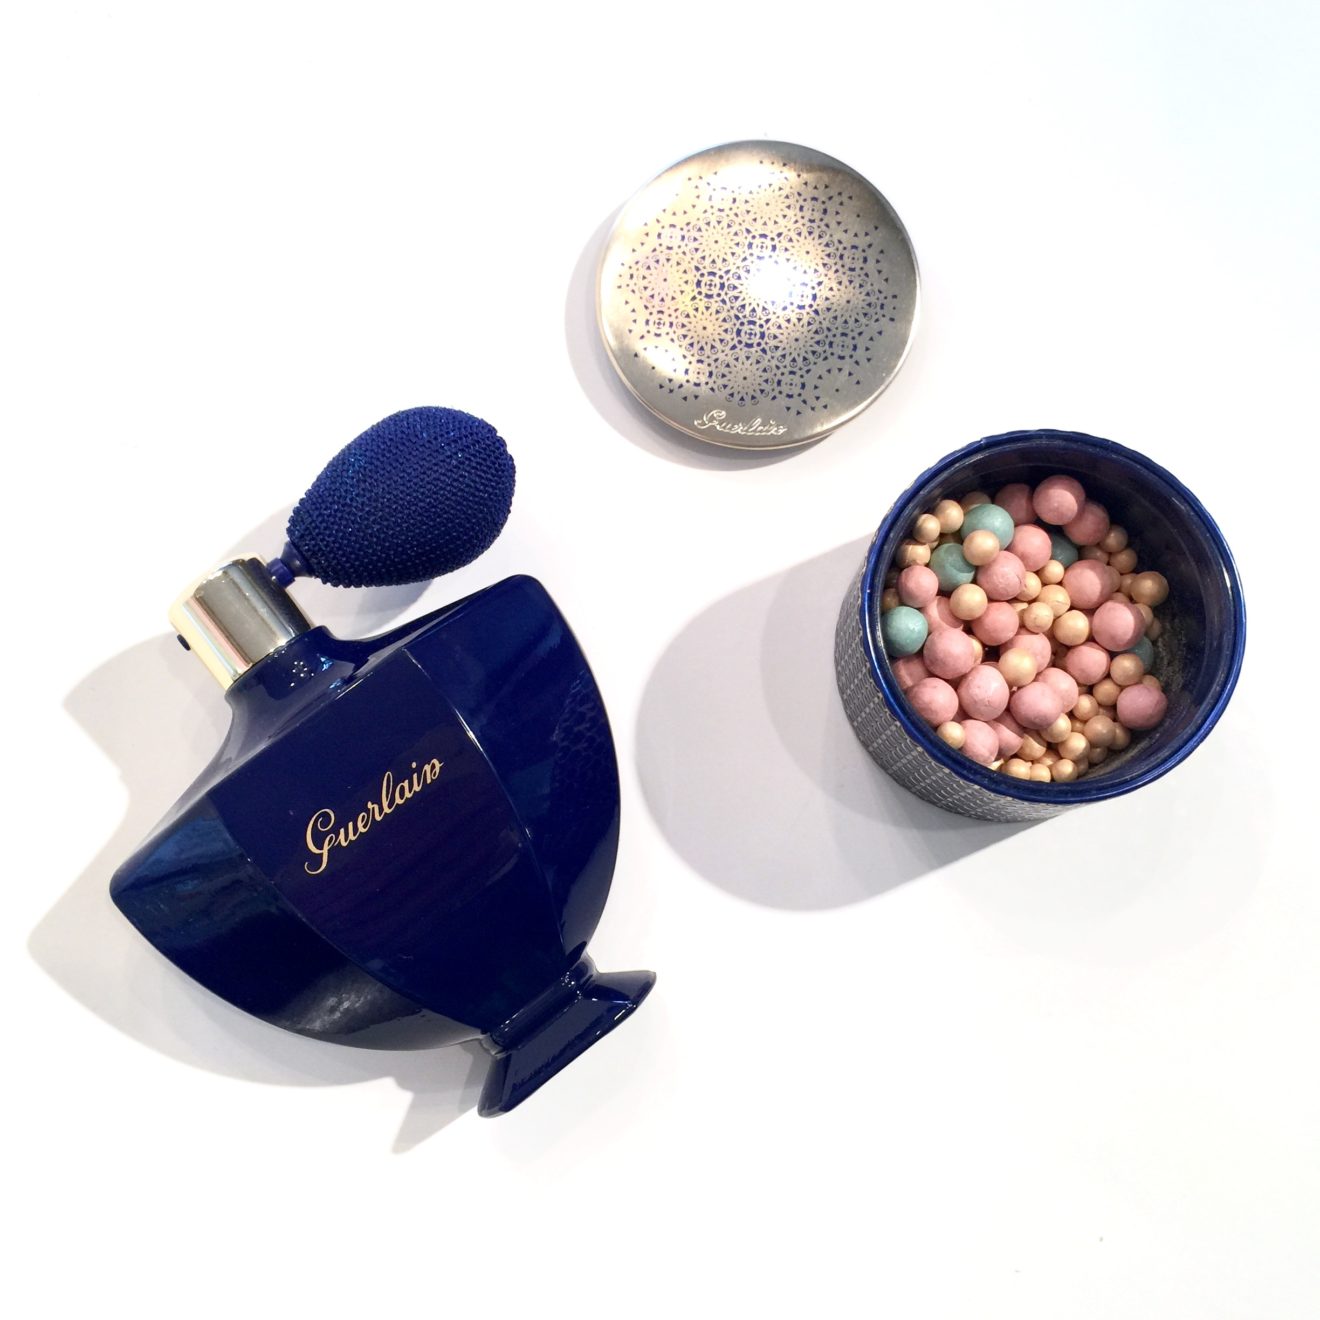 Guerlain Shalimar Holiday Makeup Collection by Natalia Vodianova